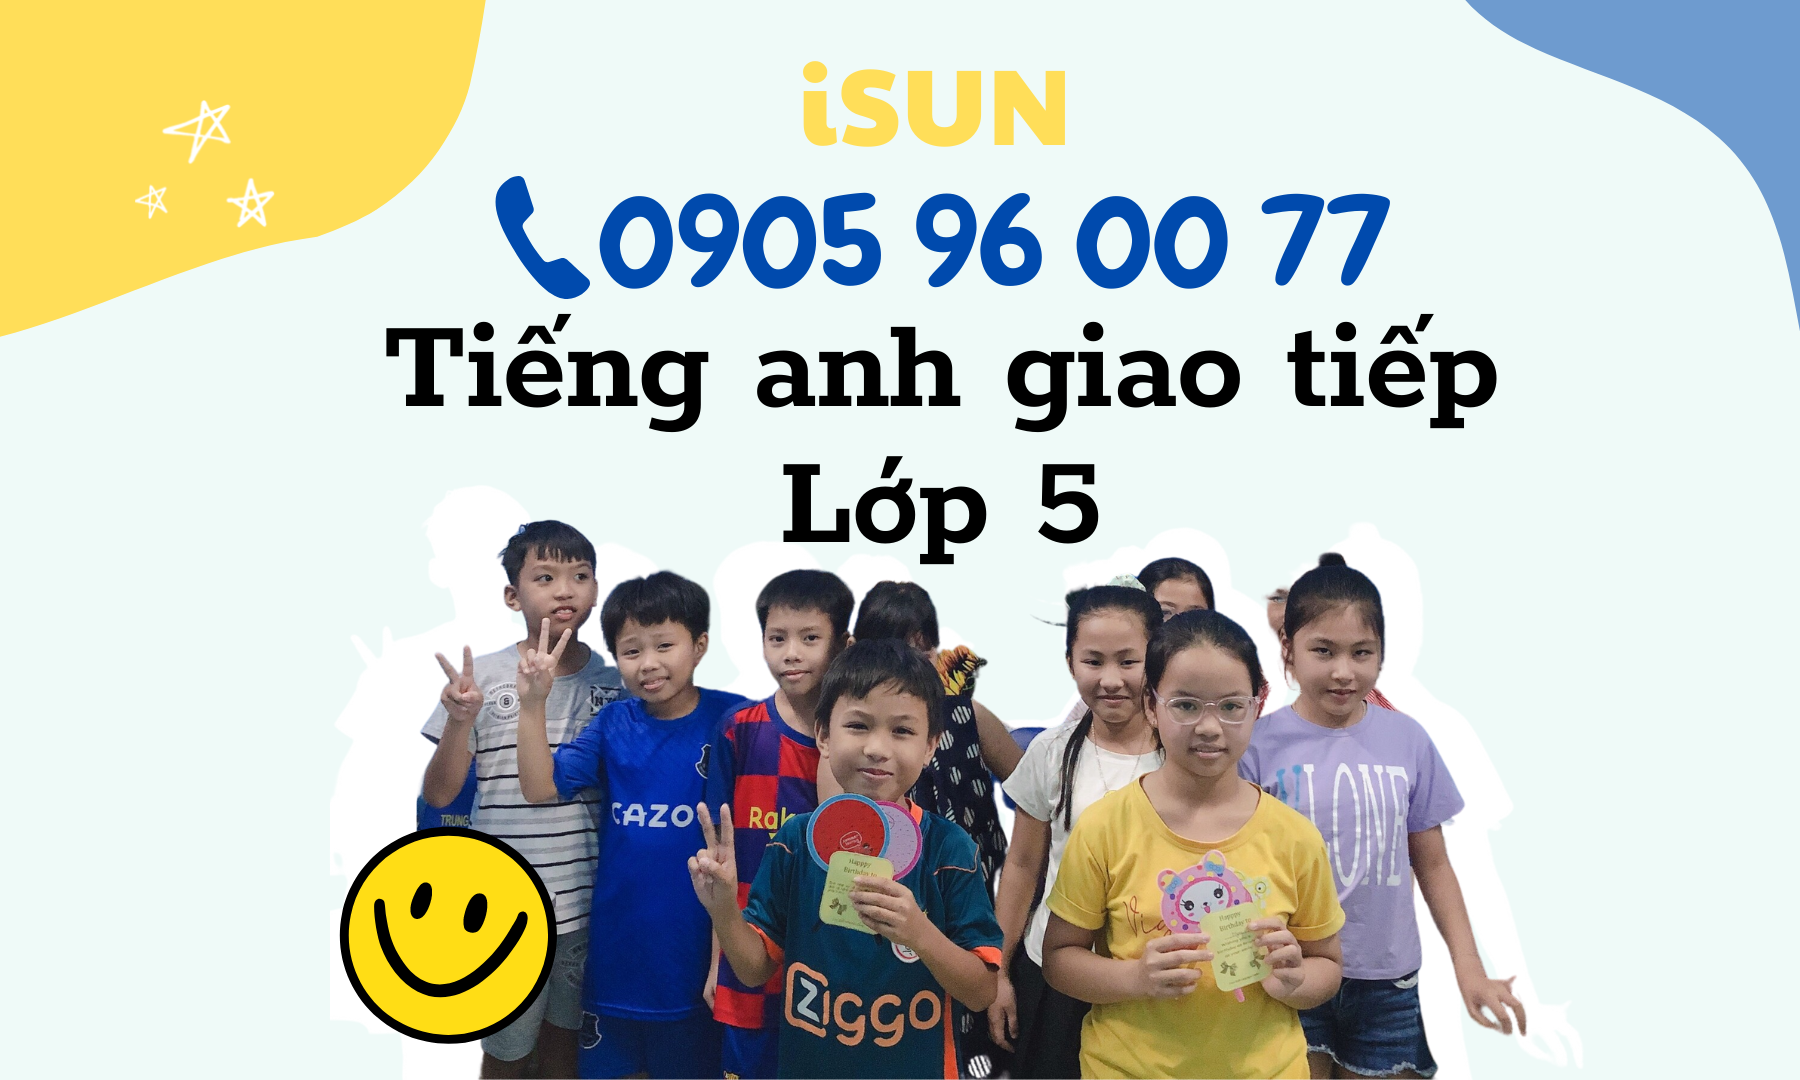 Tiếng anh giao tiếp Lớp 5